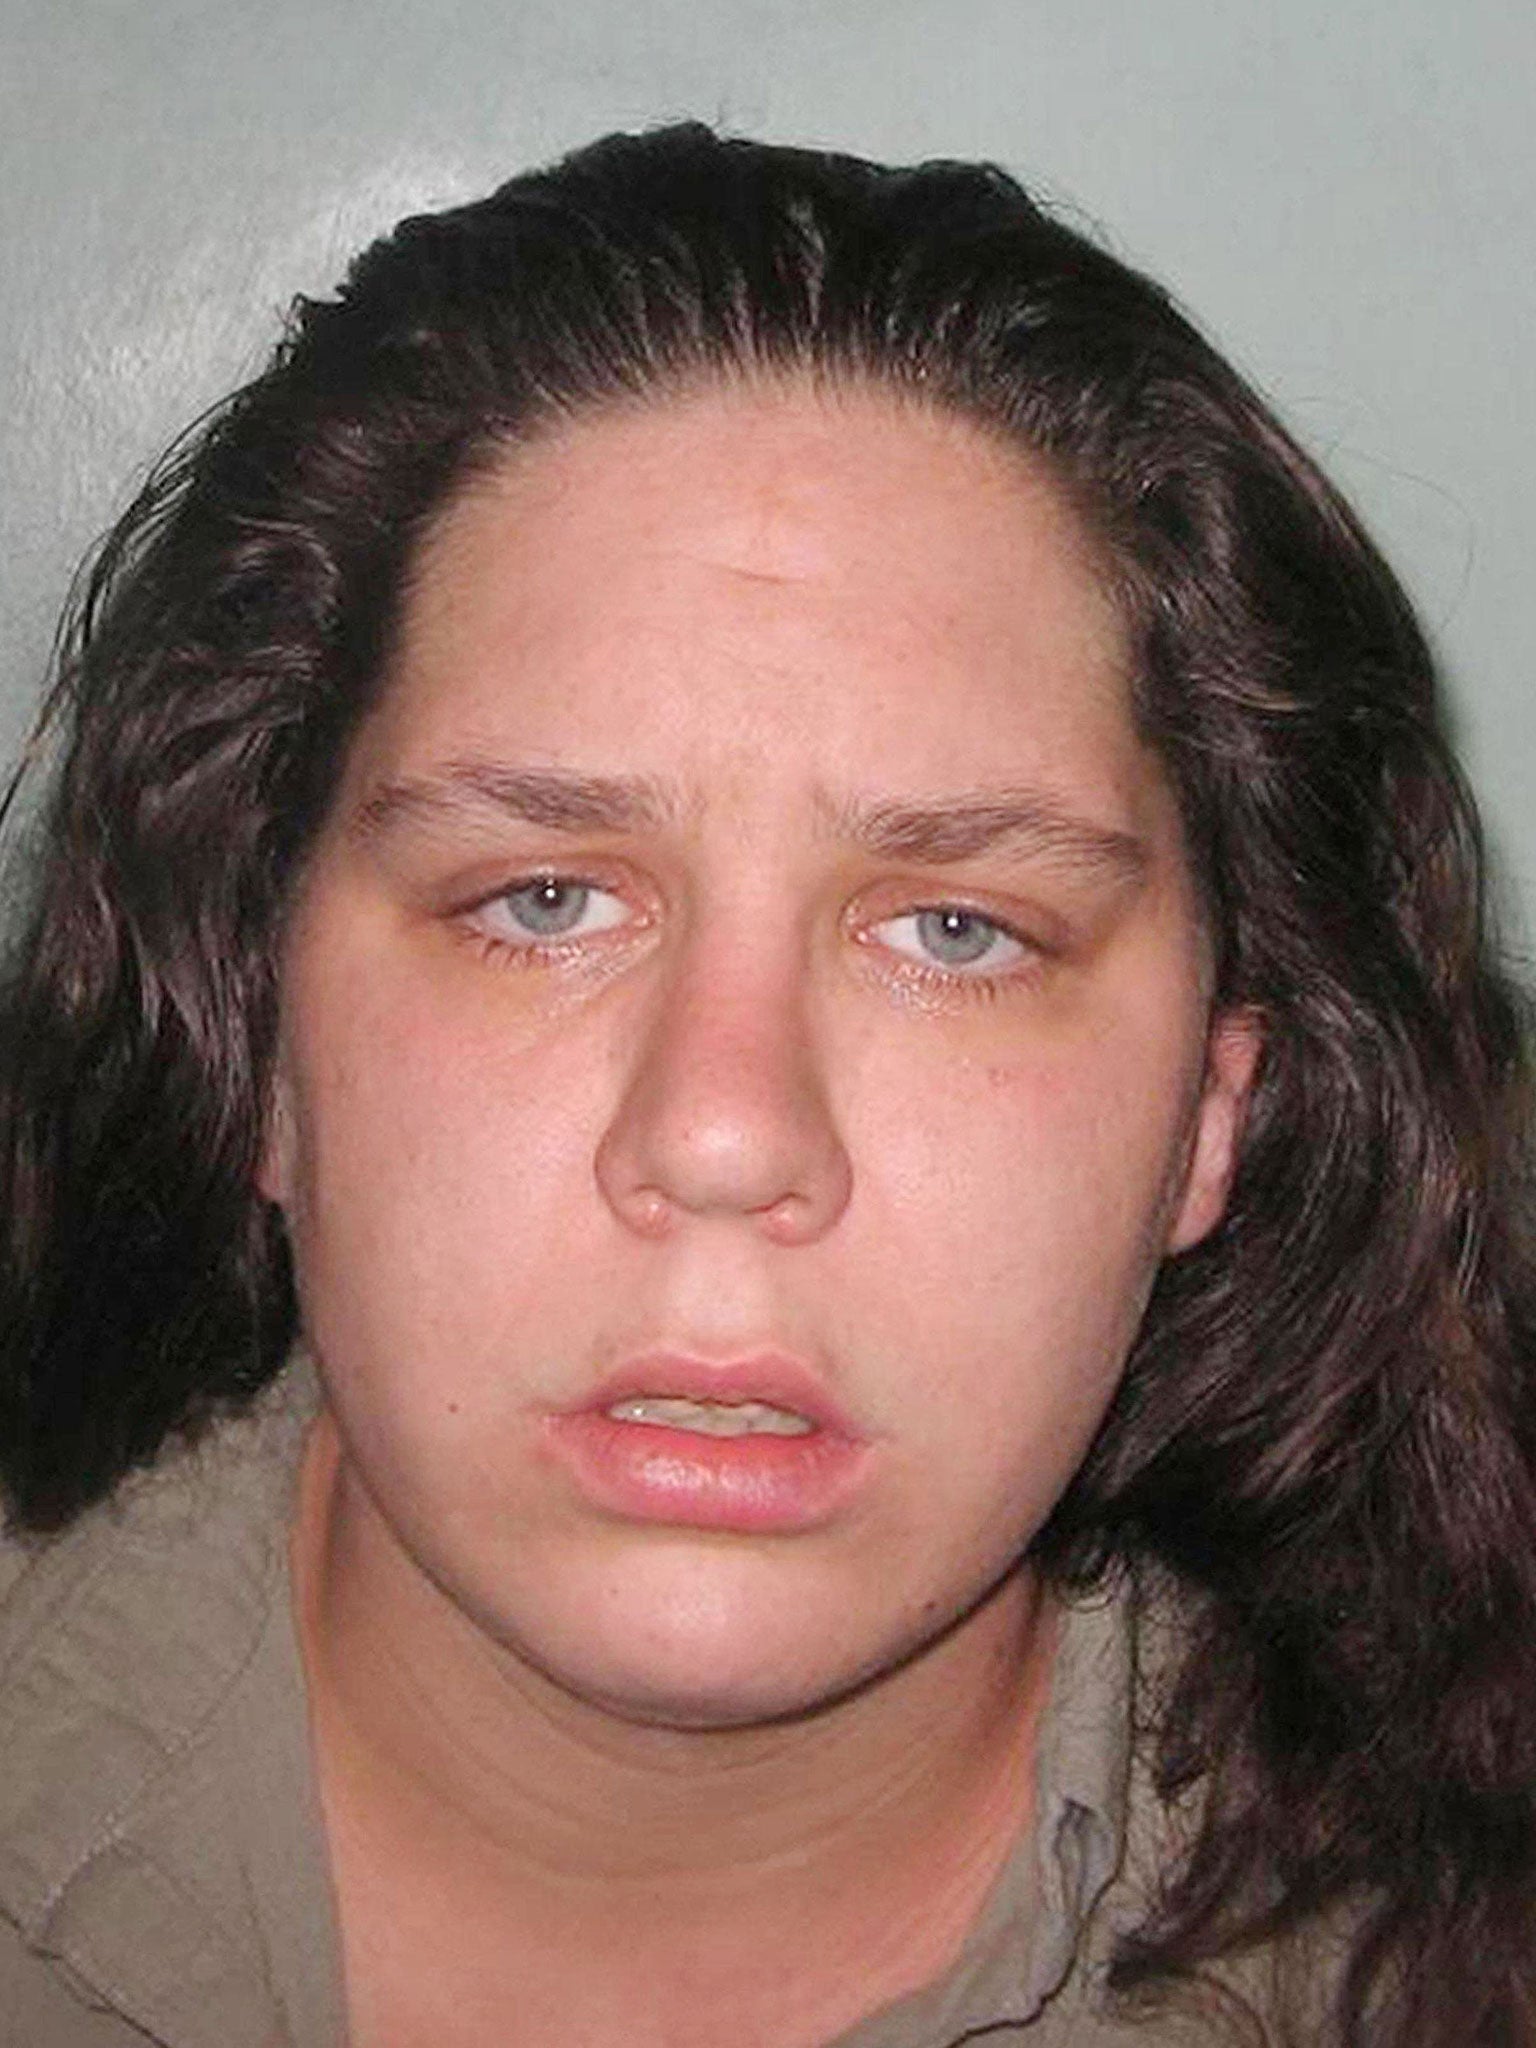 Tracey Connelly was locked up at HMP Styal in Cheshire ahead of a Parole Board hearing, after she breached her bail conditions